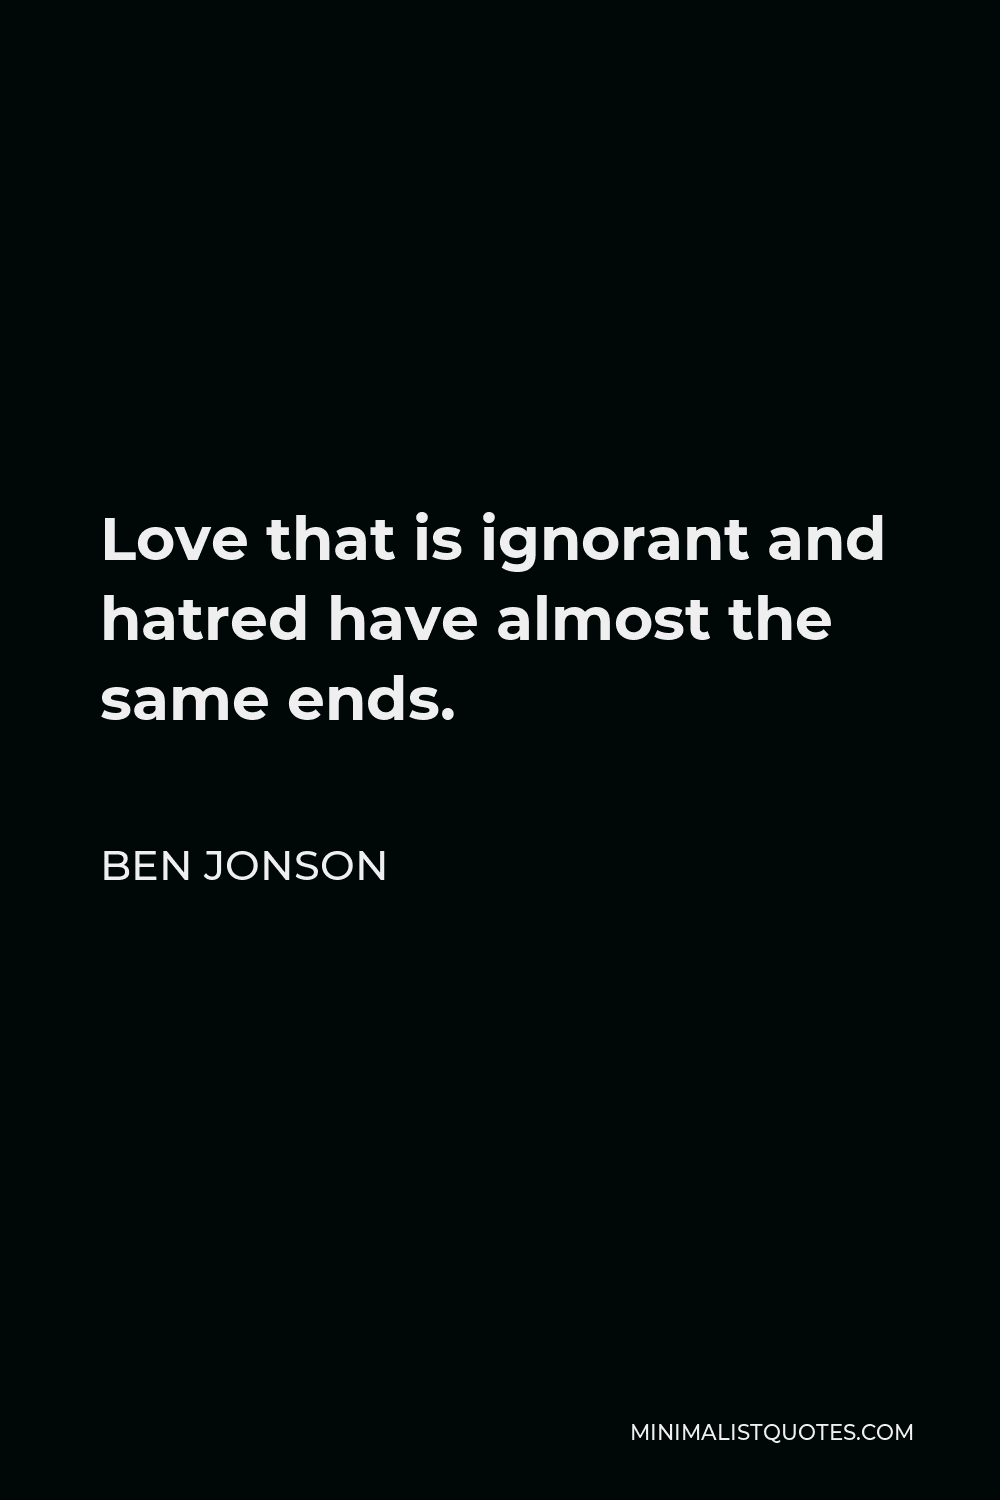 Ben Jonson Quote - Love that is ignorant and hatred have almost the same ends.